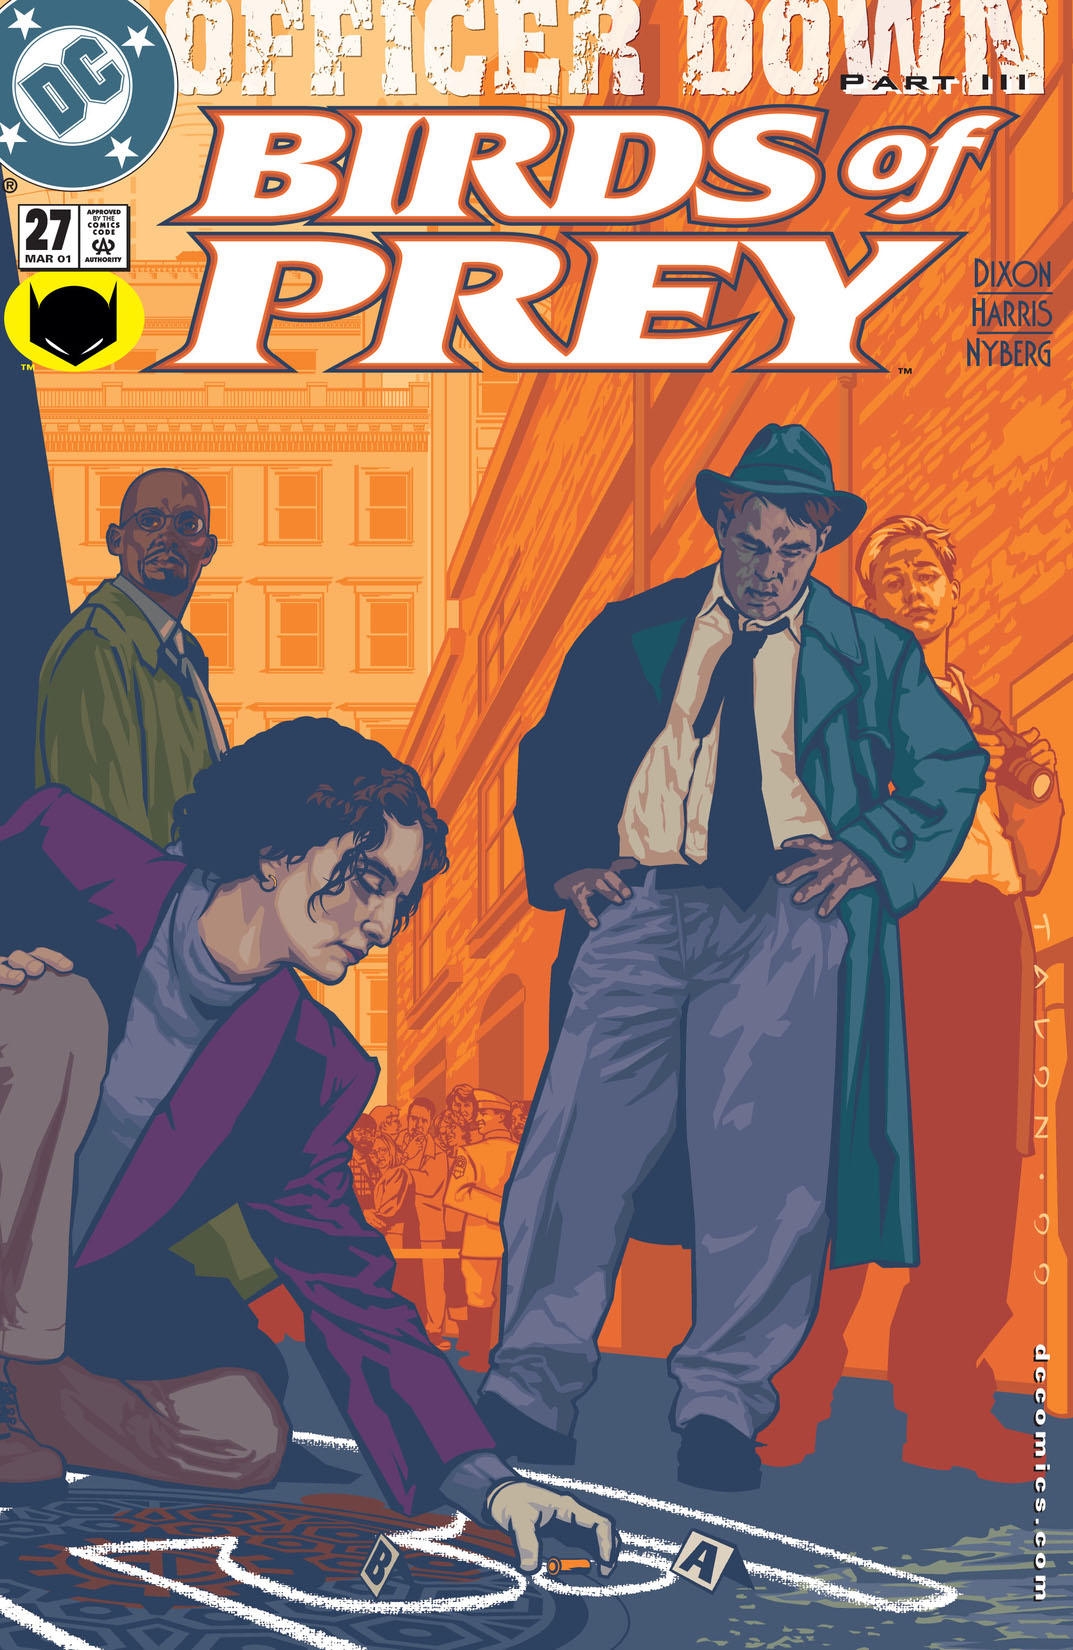 Birds of Prey (1998-) #27 preview images